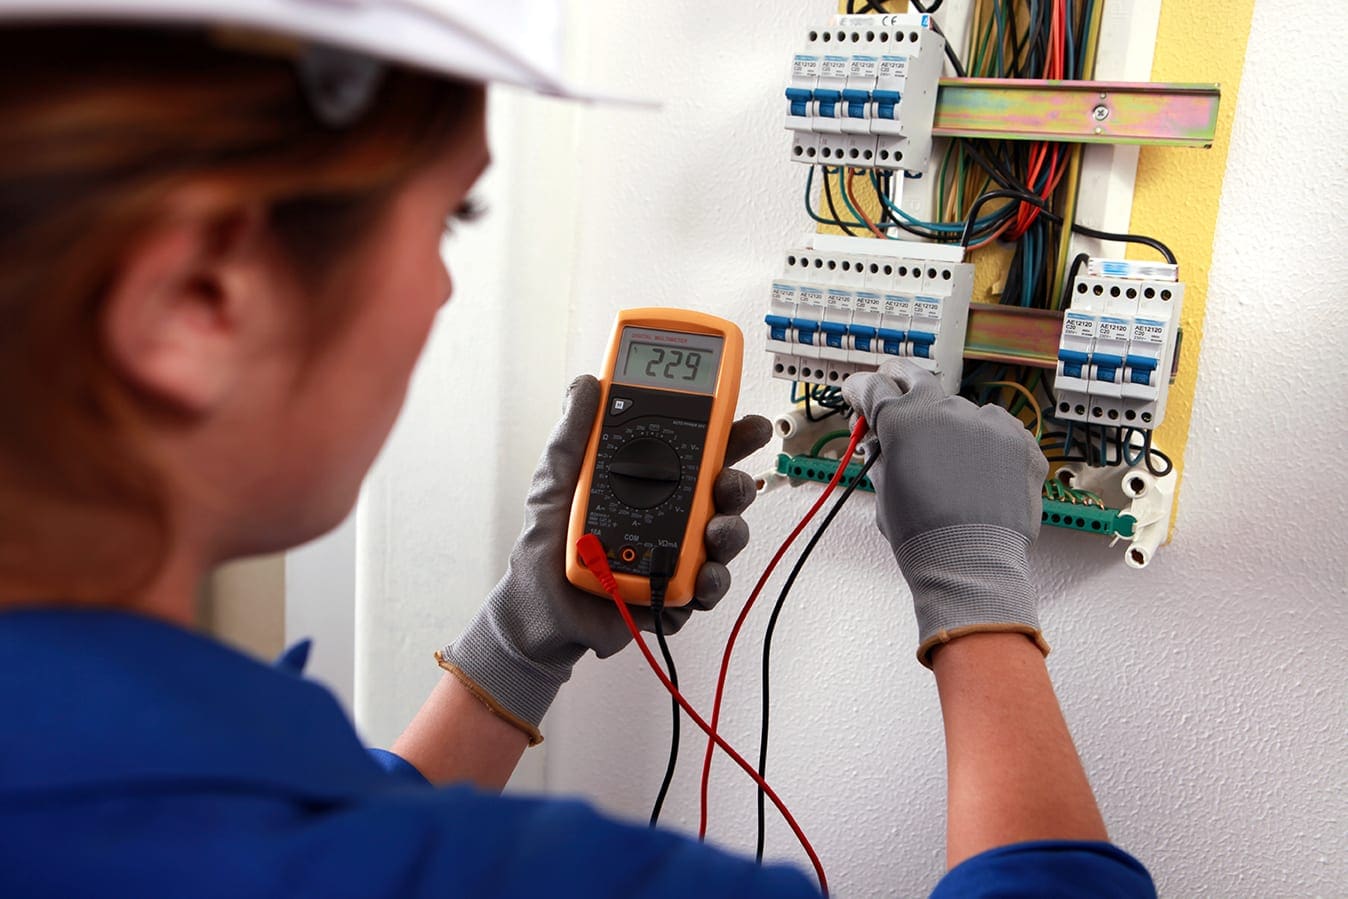 An electrical worker testing a circuit